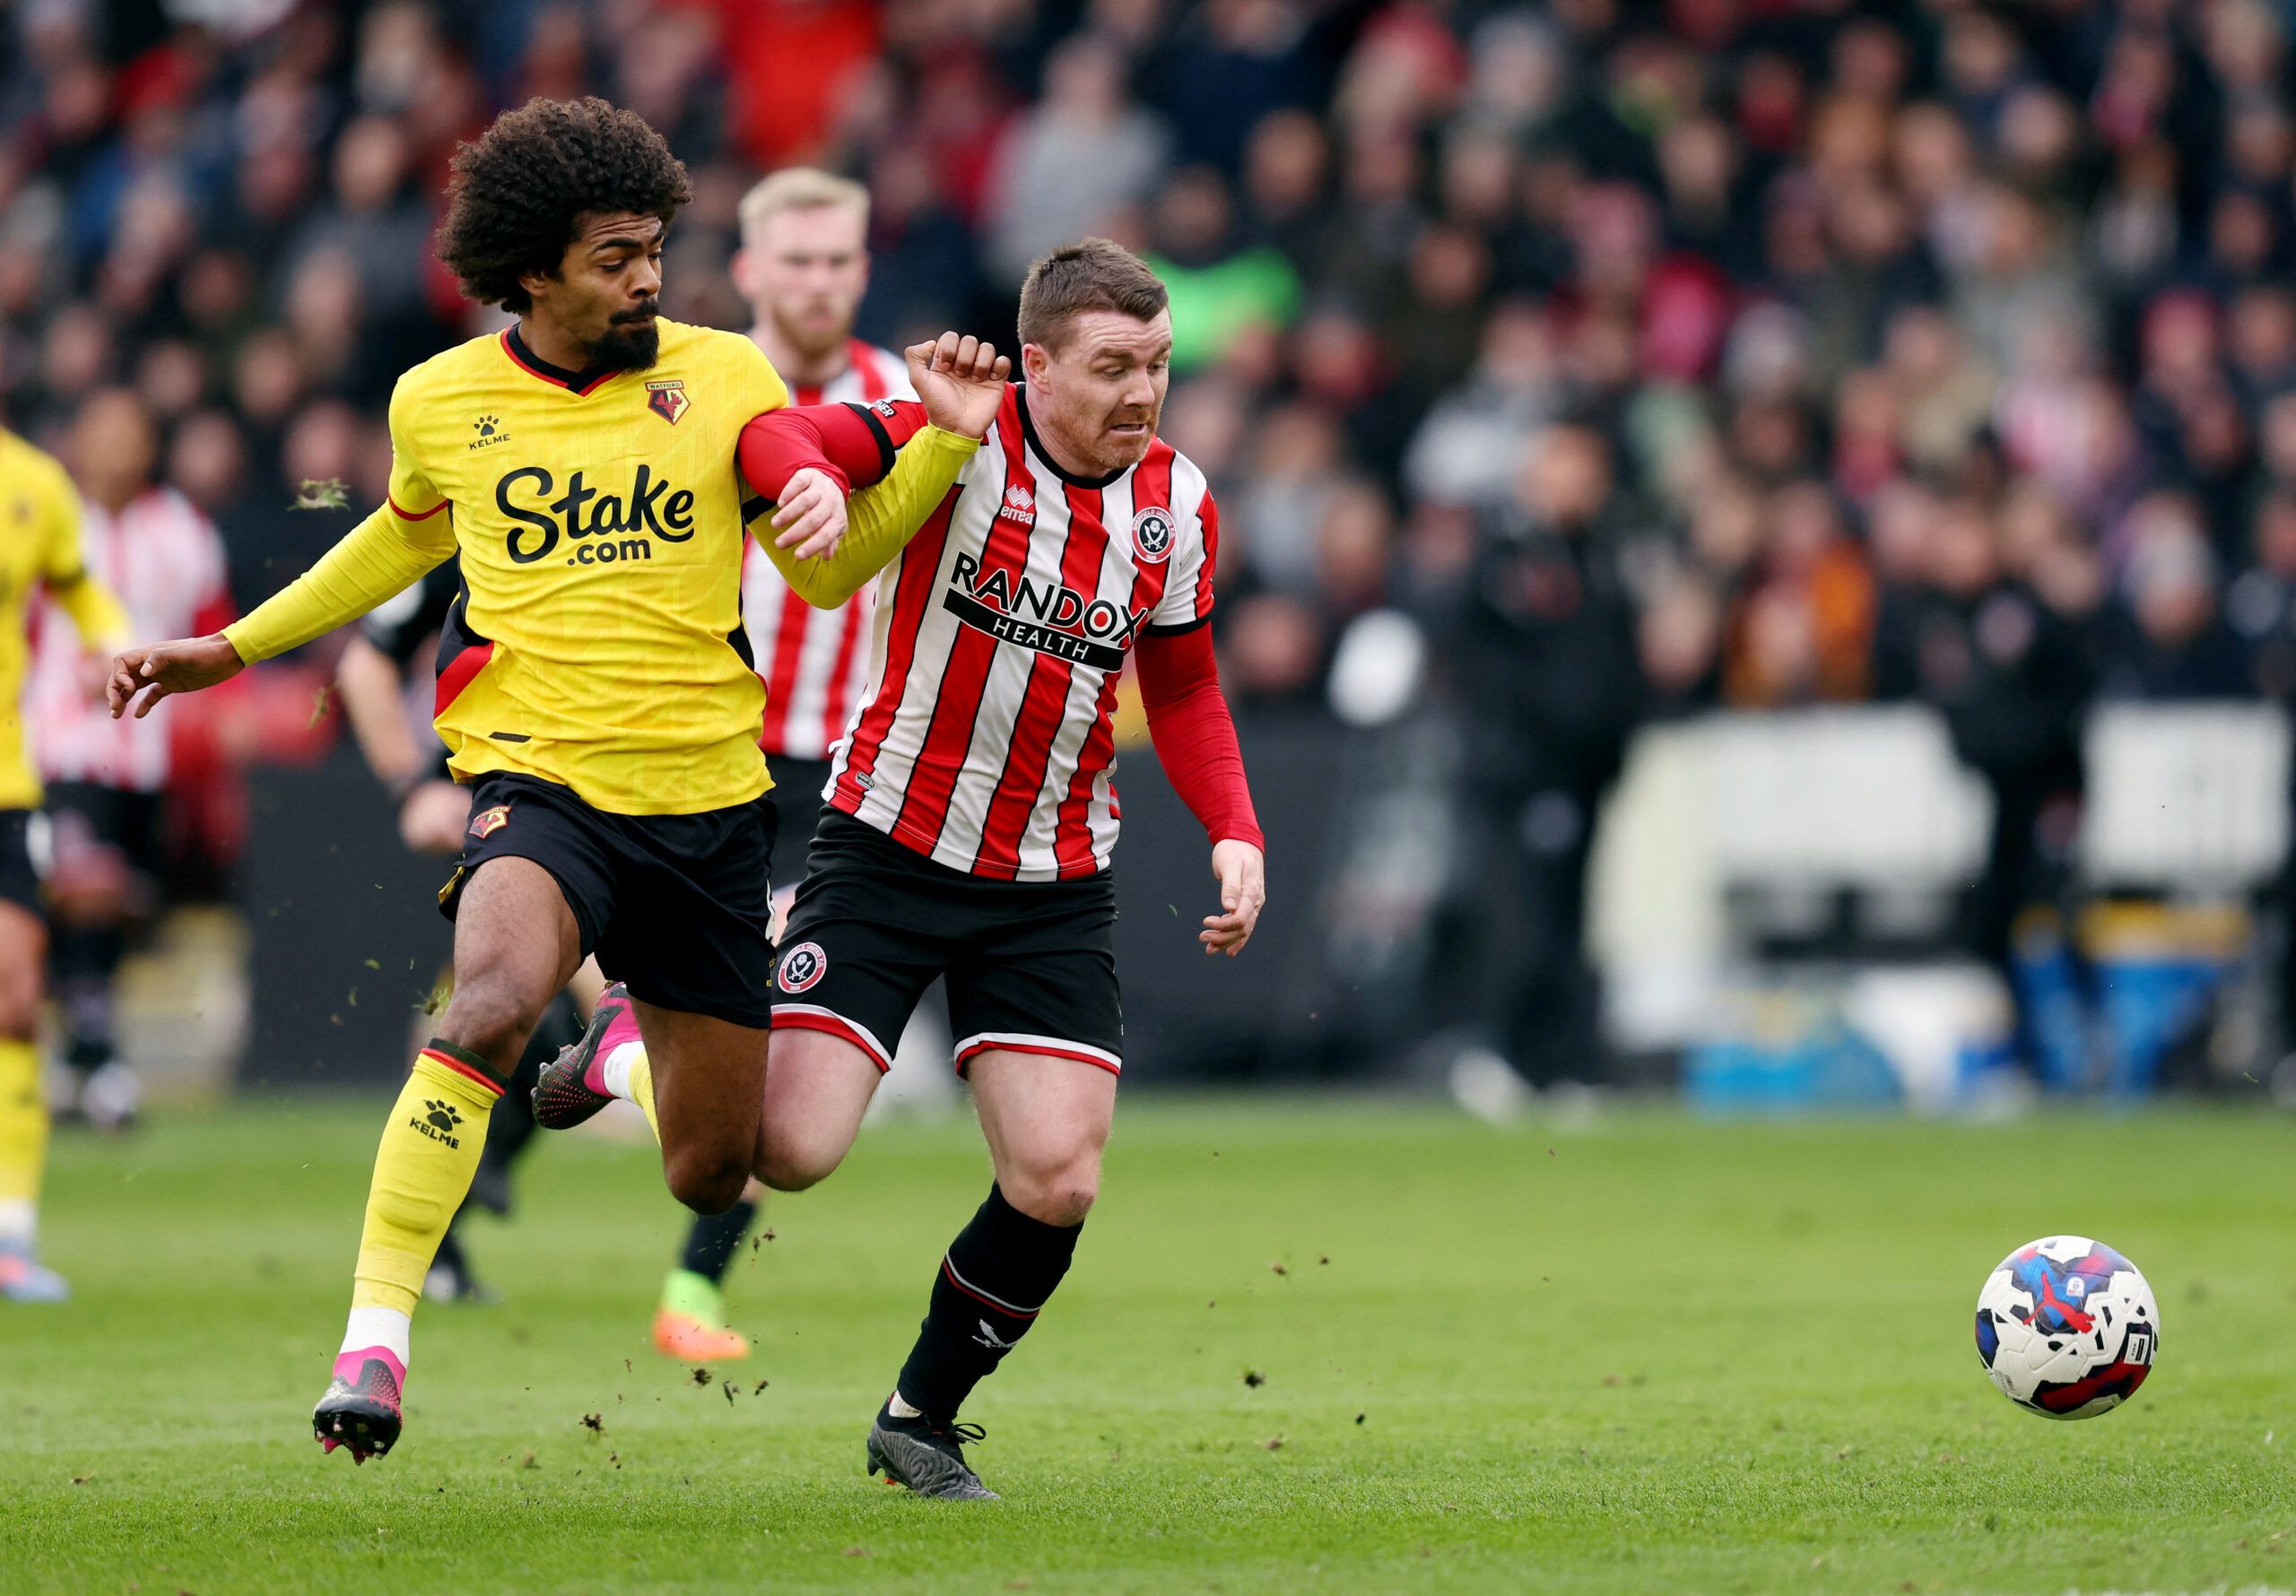 Soccer Football - Championship - Sheffield United v Watford - Bramall Lane, Sheffield, Britain - February 25, 2023 Sheffield United's John Fleck in action with Watford's Hamza Choudhury  Action Images/John Clifton  EDITORIAL USE ONLY. No use with unauthorized audio, video, data, fixture lists, club/league logos or 